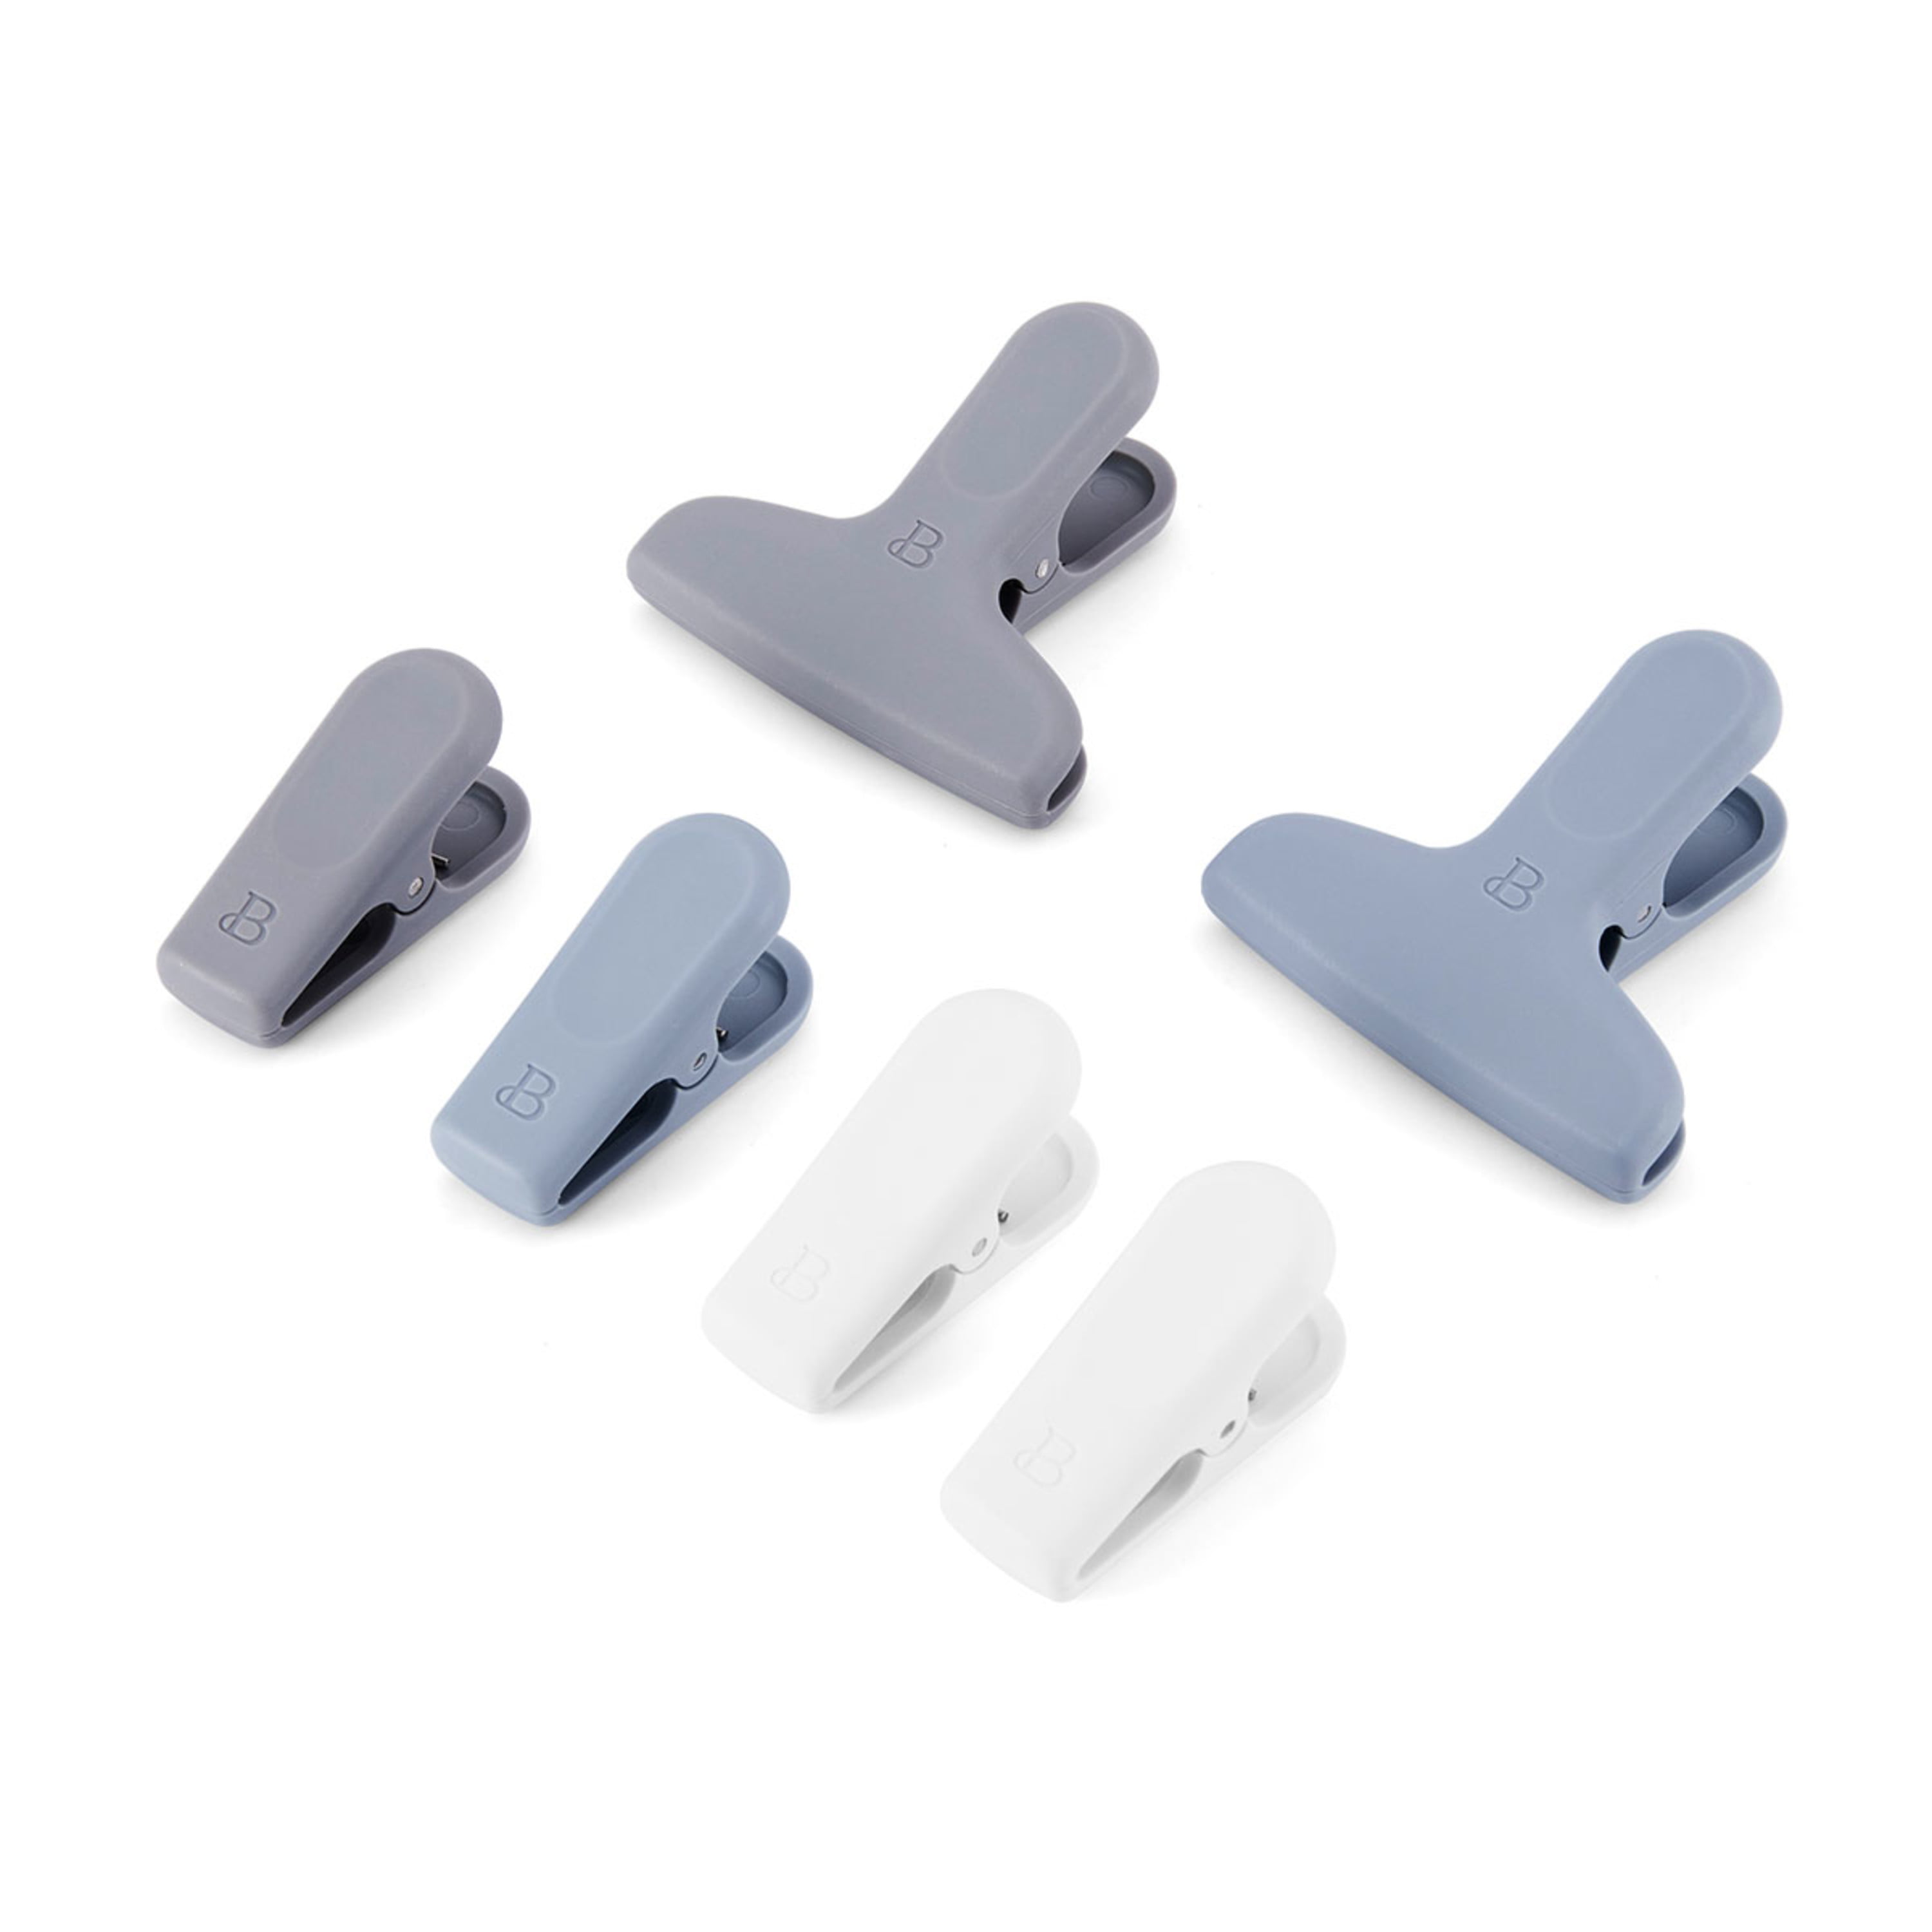 Promo Large Bag Clips (6 x 3), Household